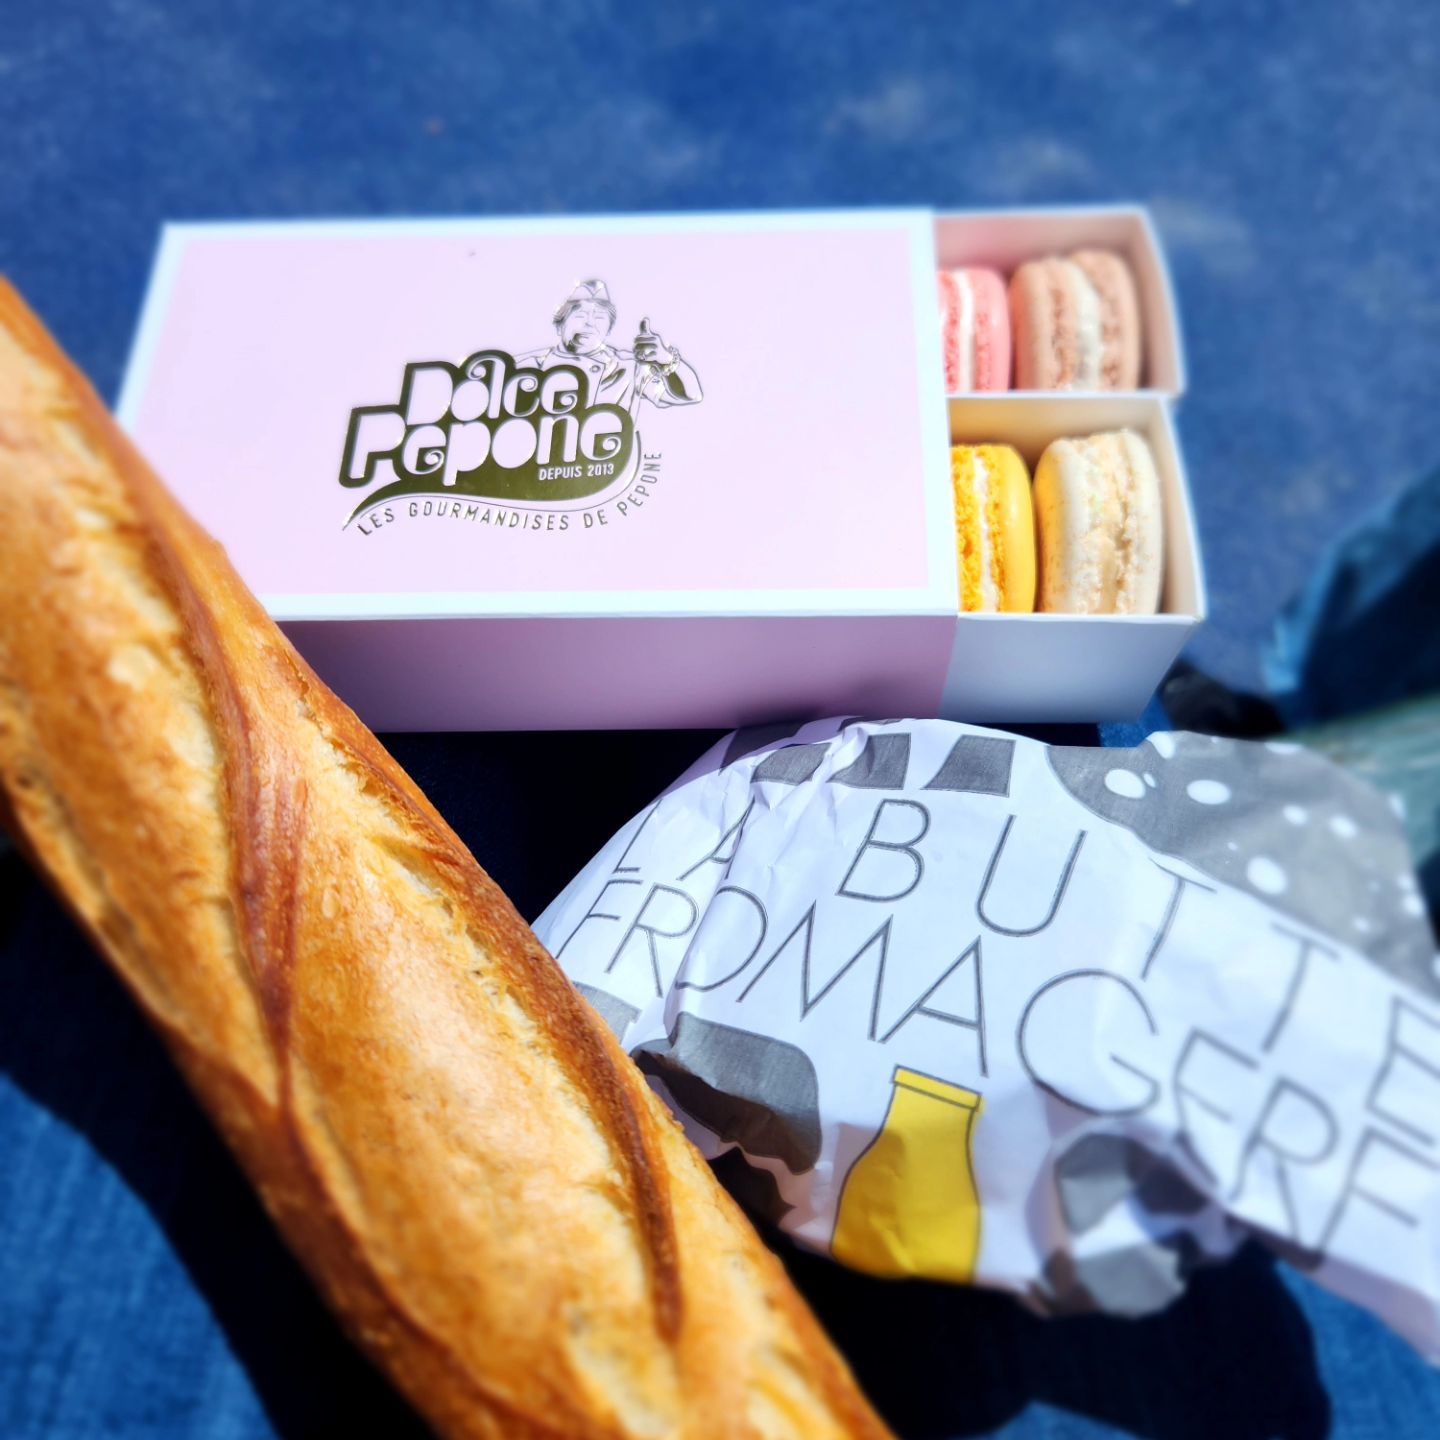 My favorite place to go in Paris is to #Montmartre . A vibrant artistic area with the best Butcher, cheese shop and macarons that I have found anywhere in the city so far. 
@dolcepepone hands down has the best textured and flavored macarons in Paris!